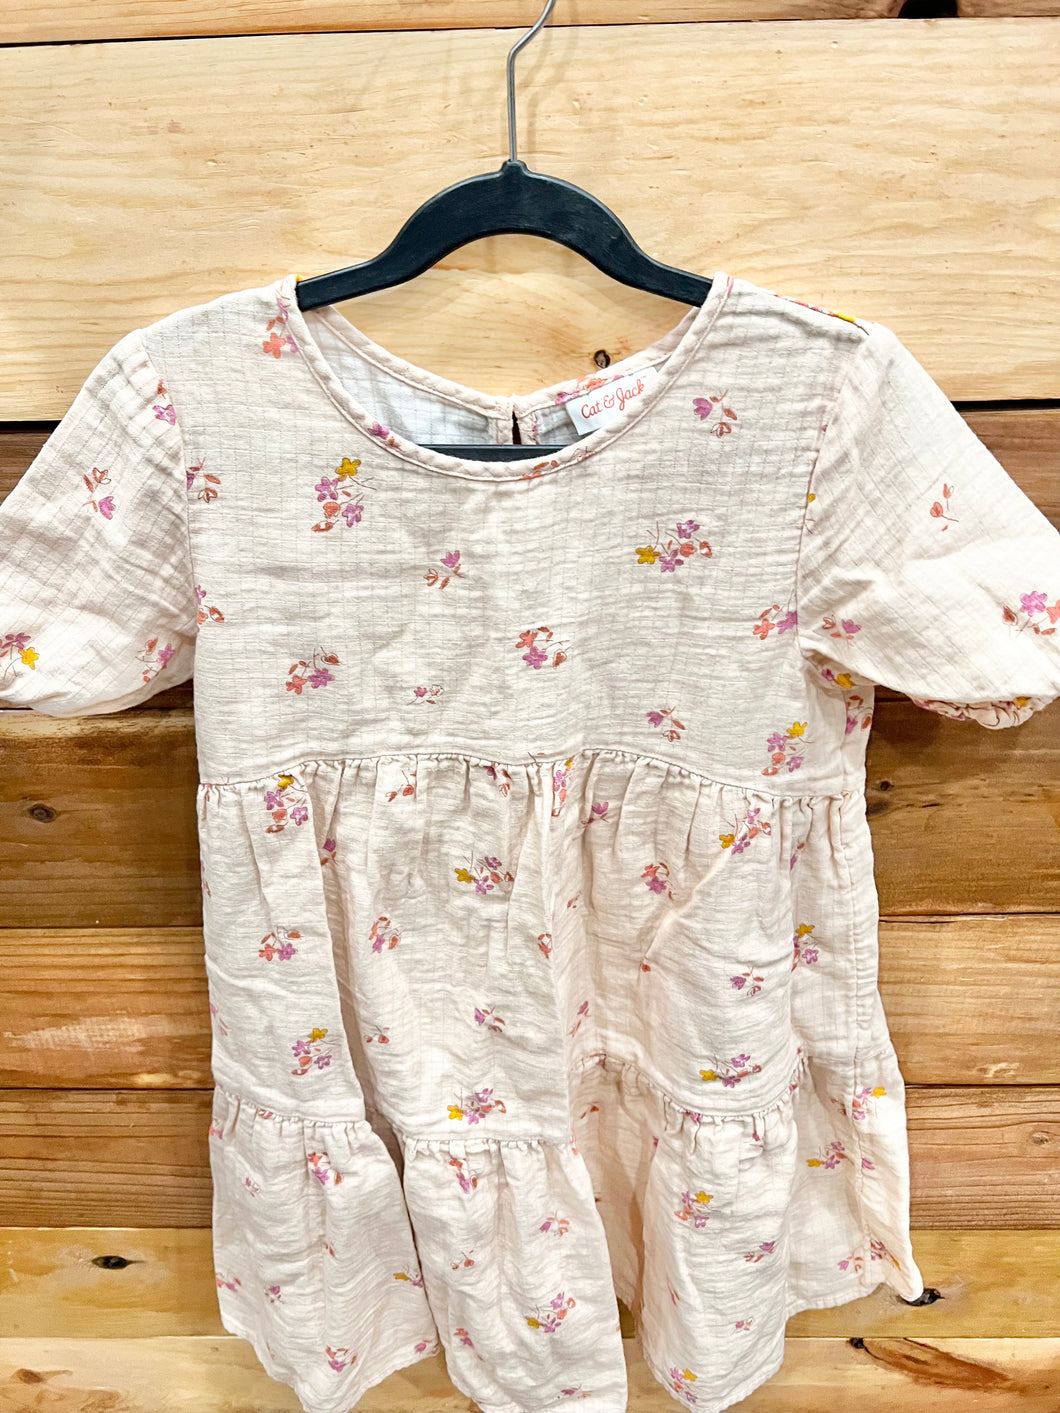 NEW Cat & Jack Floral Dress sz 3T – Me 'n Mommy To Be